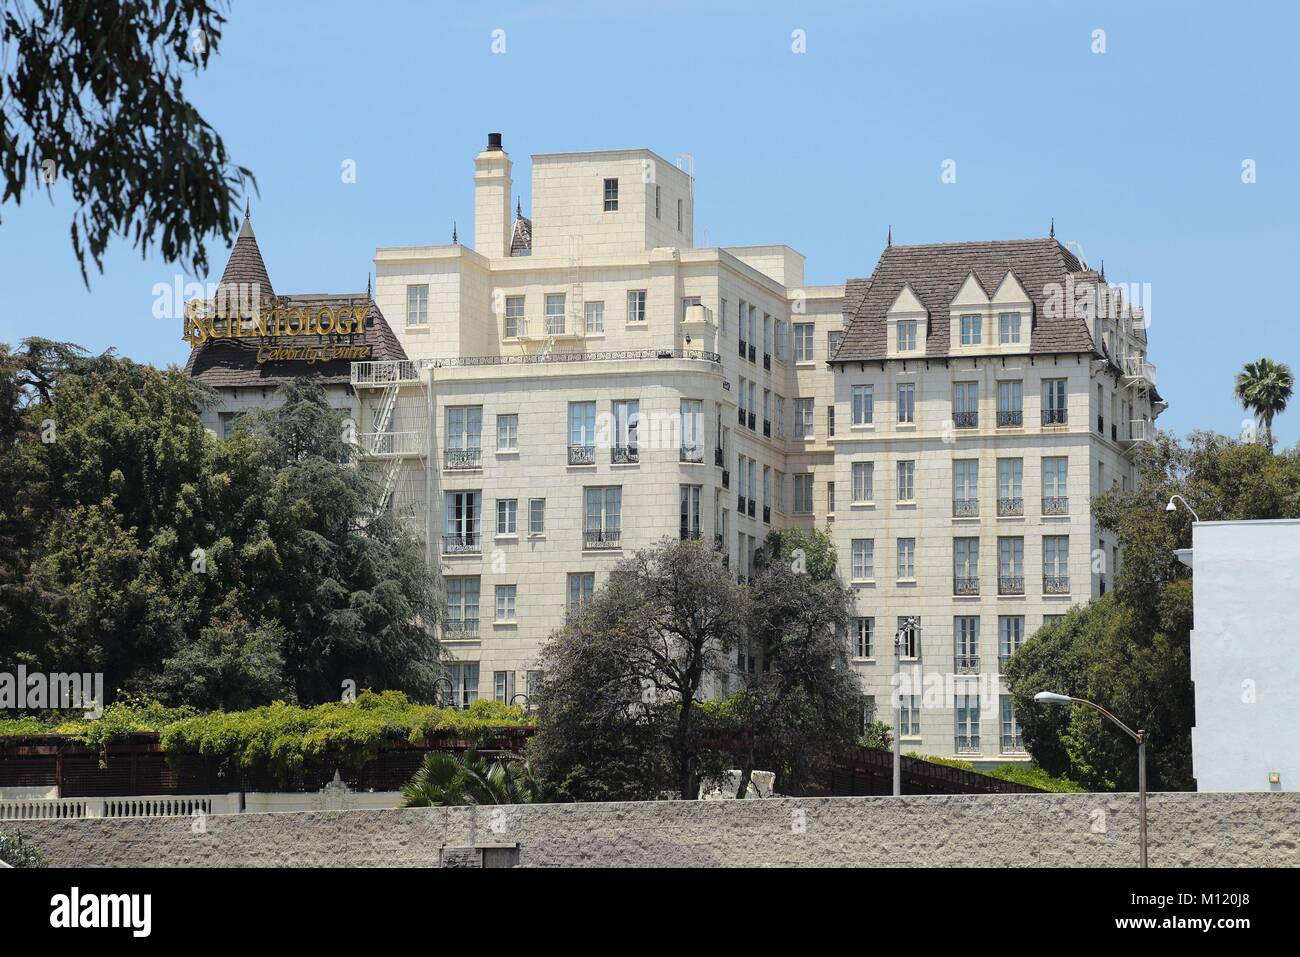 Los Angeles, CA / USA - June 11, 2016: daytime view of the Scientology Celebrity Centre on Franklin Ave. in Hollywood Stock Photo